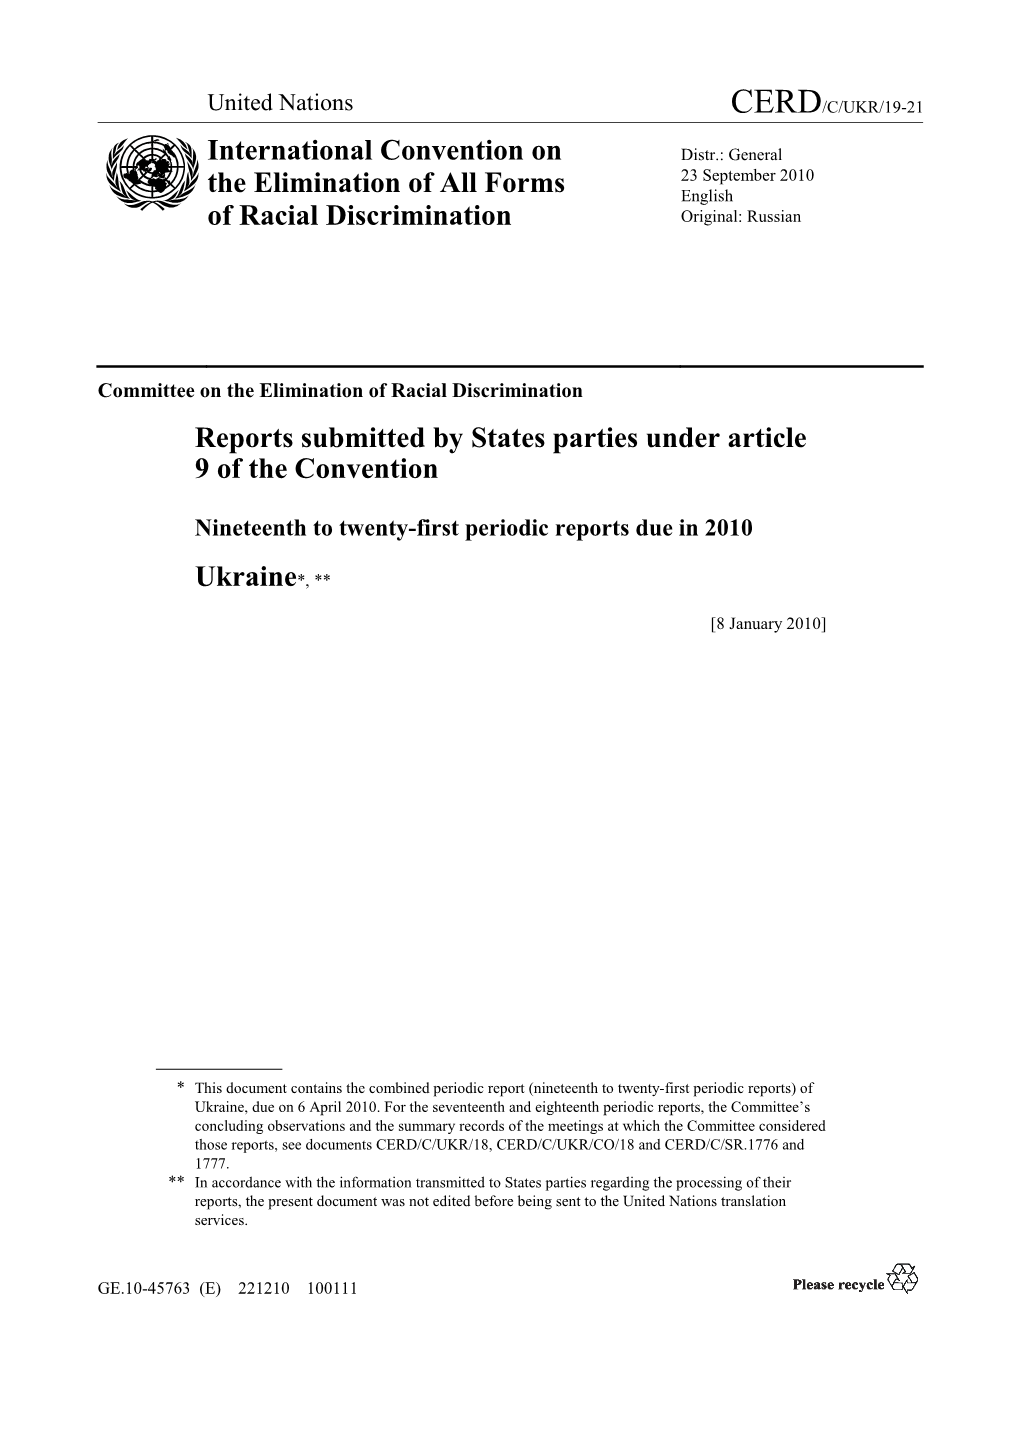 Reports Submitted by States Parties Under Article 9 of the Convention